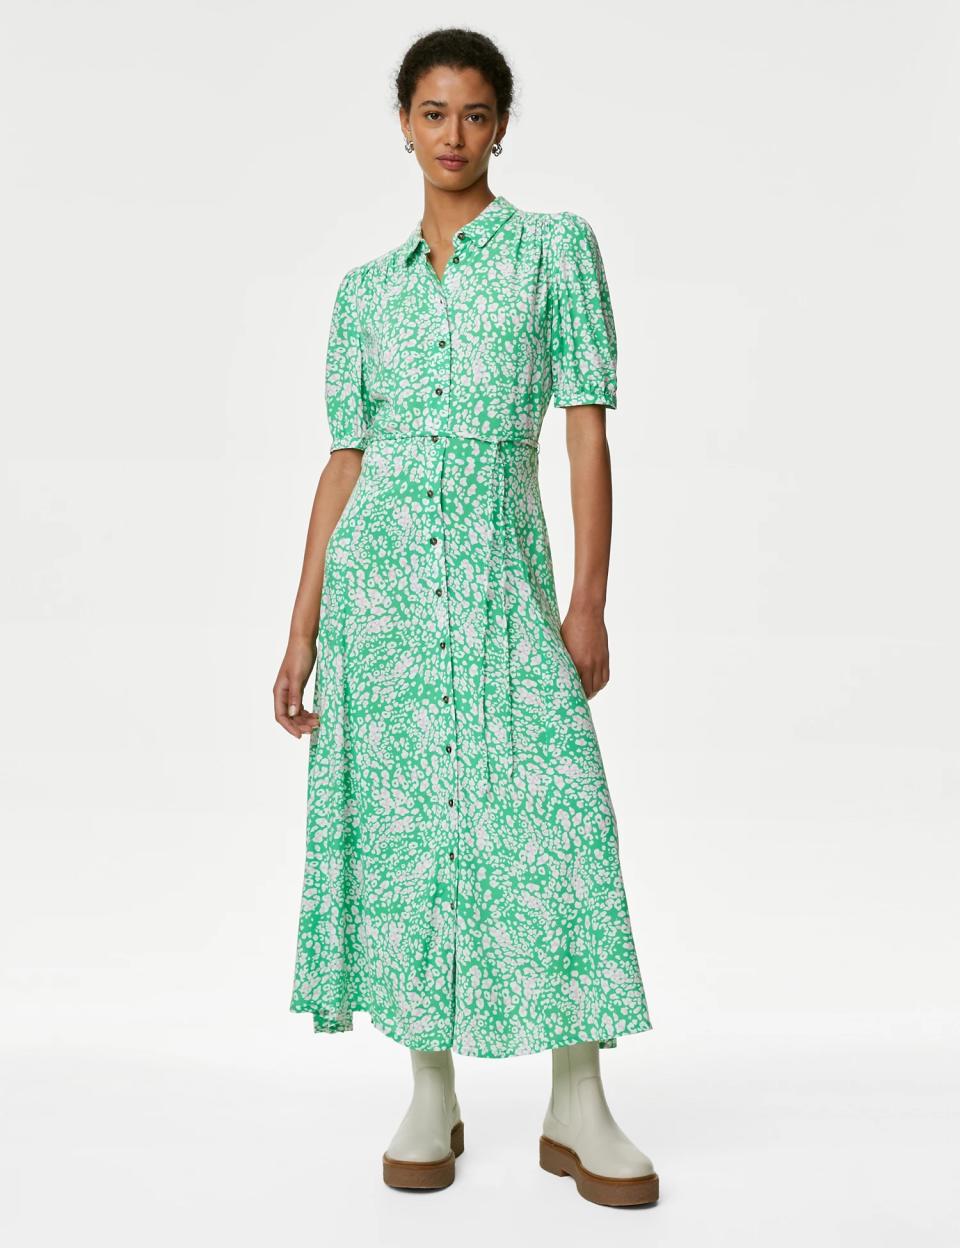 Light green printed midaxi dress from Marks & Spencer.